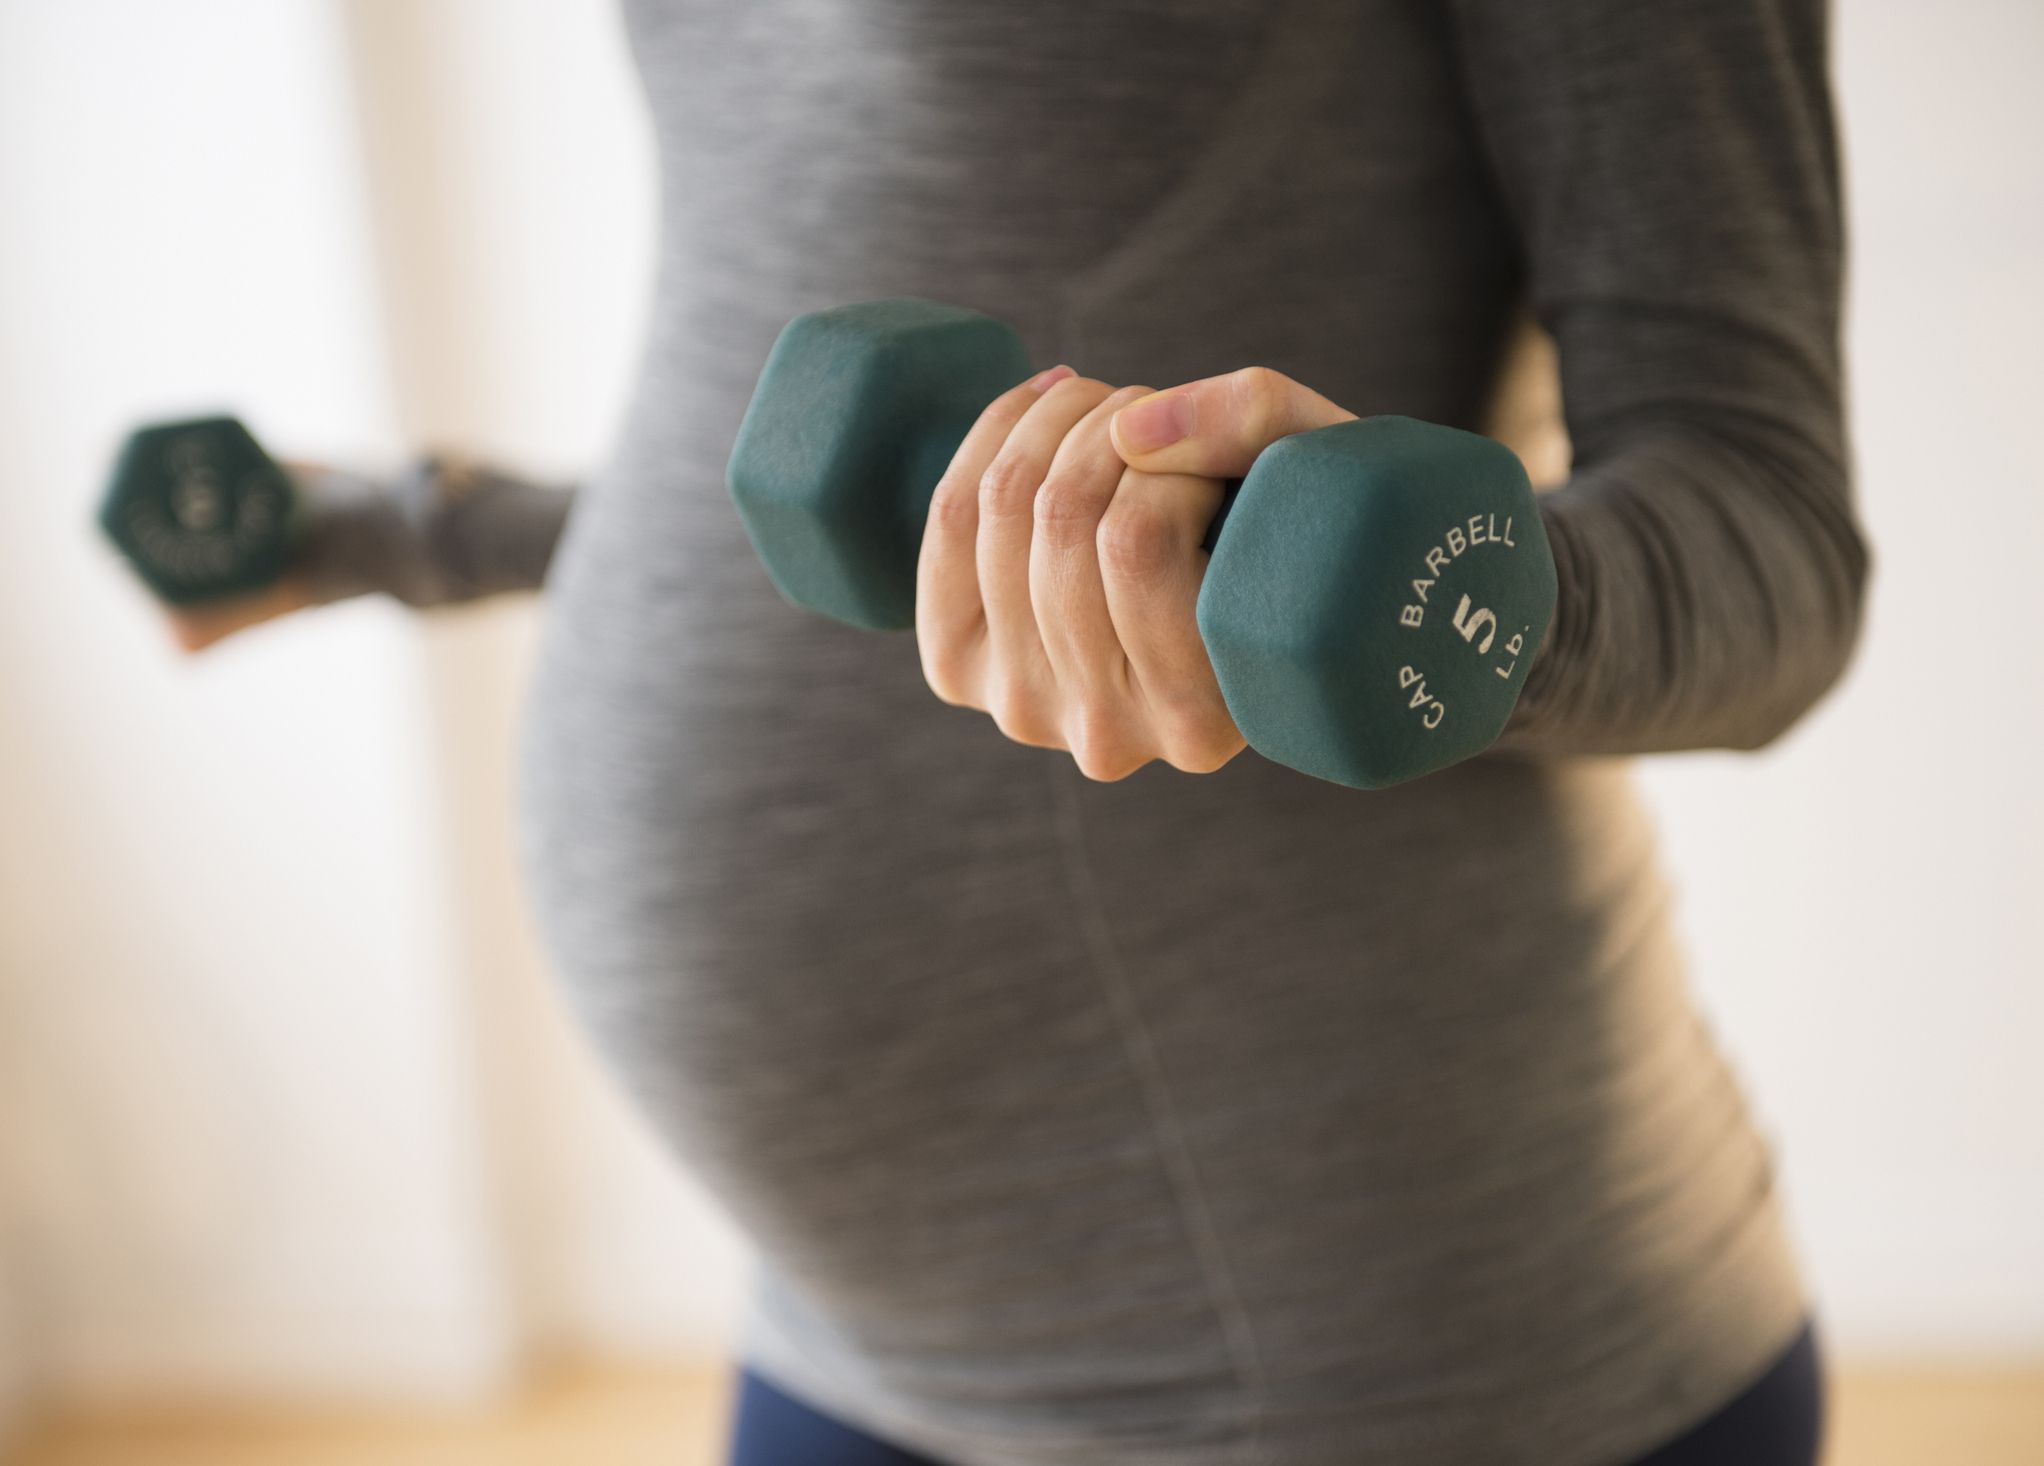 Can You Do Pilates While Pregnant? Here's What's Safe & What's Not